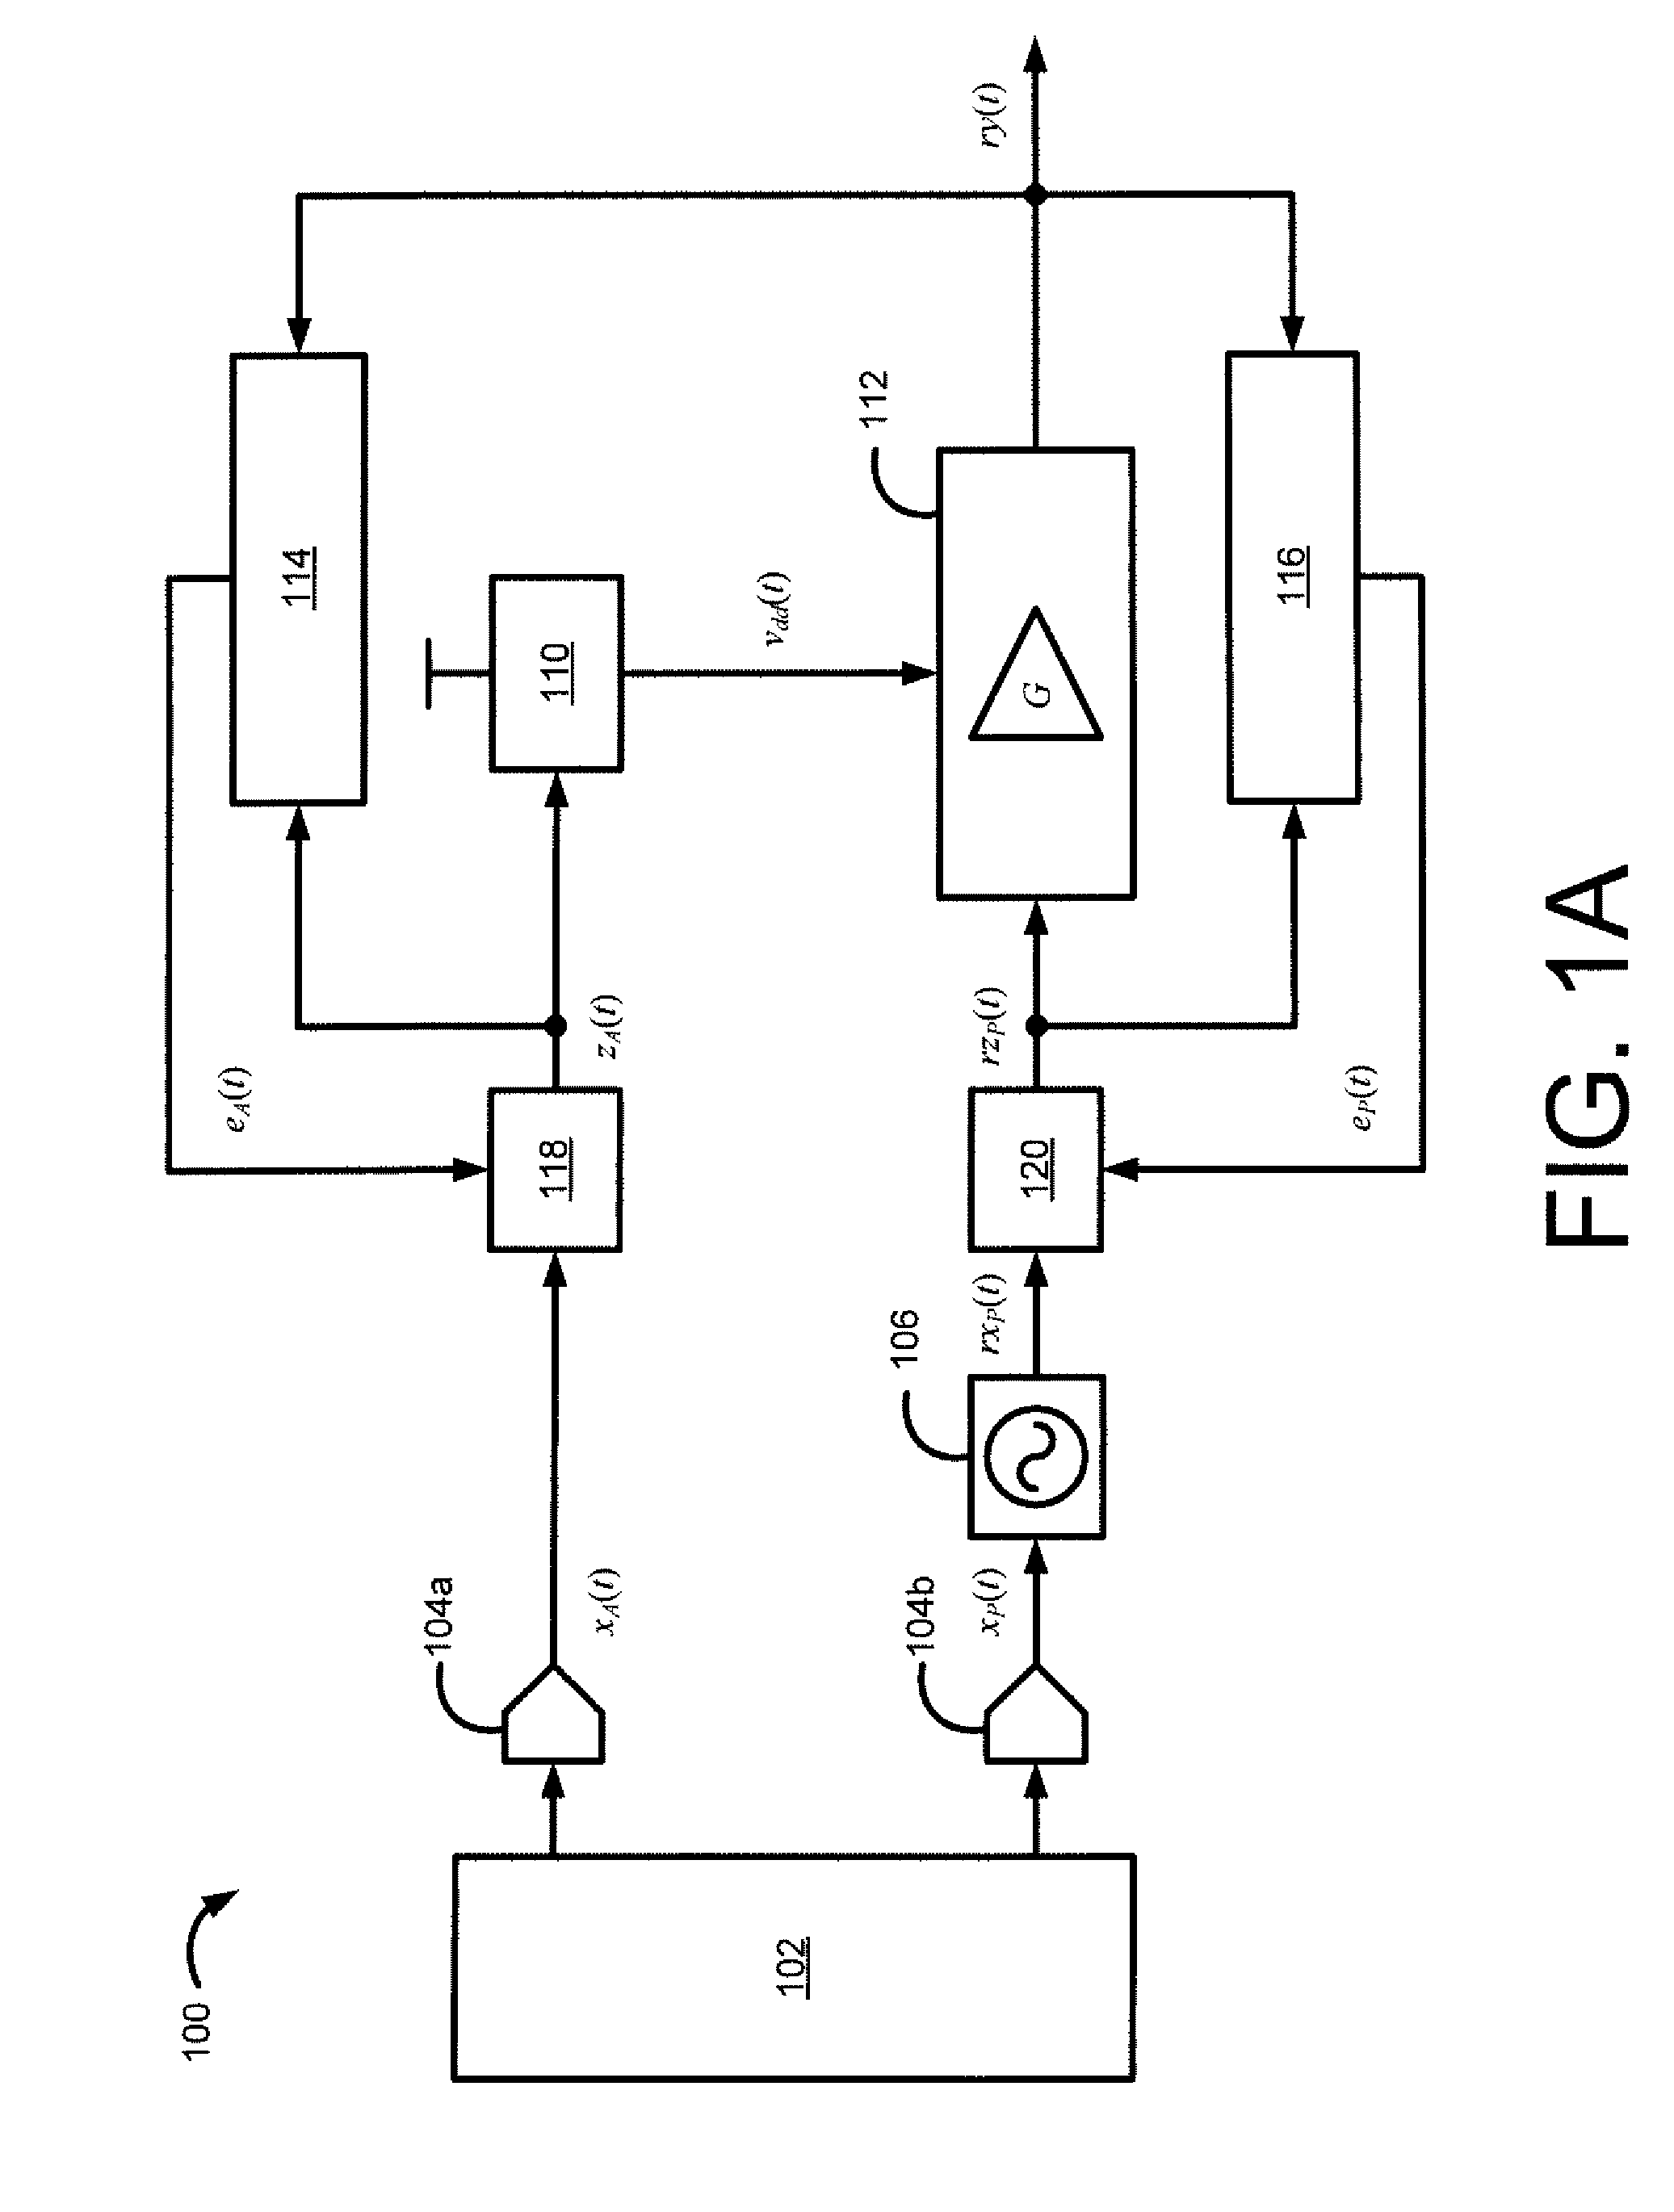 Systems, methods, and apparatuses for linear polar transmitters